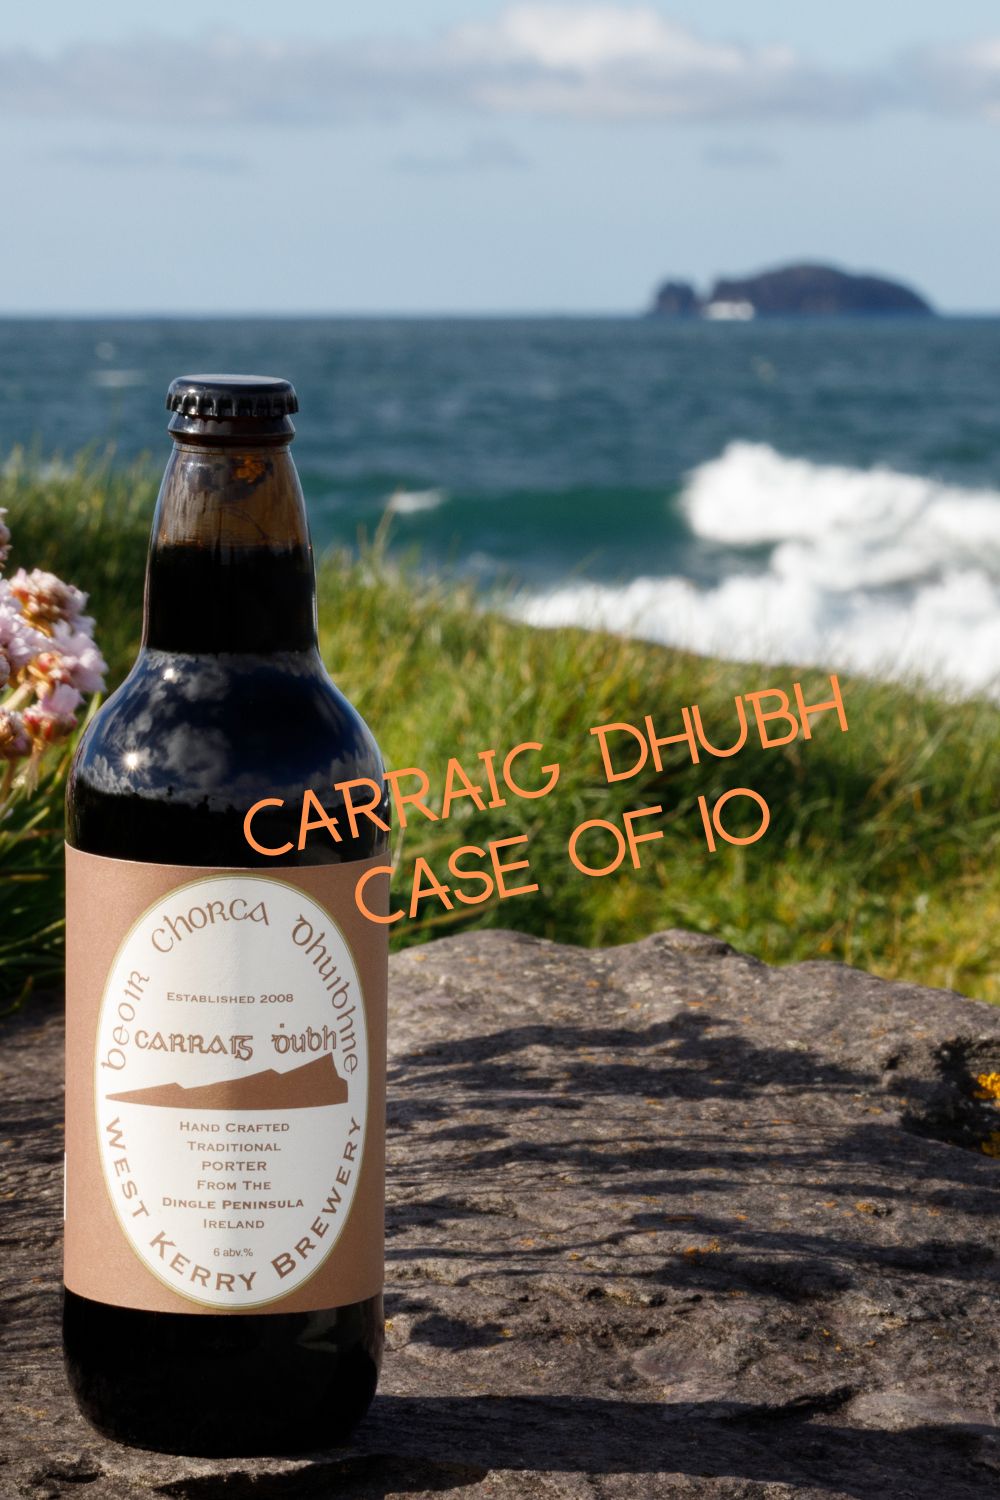 Carraig Dhubh Case of 10